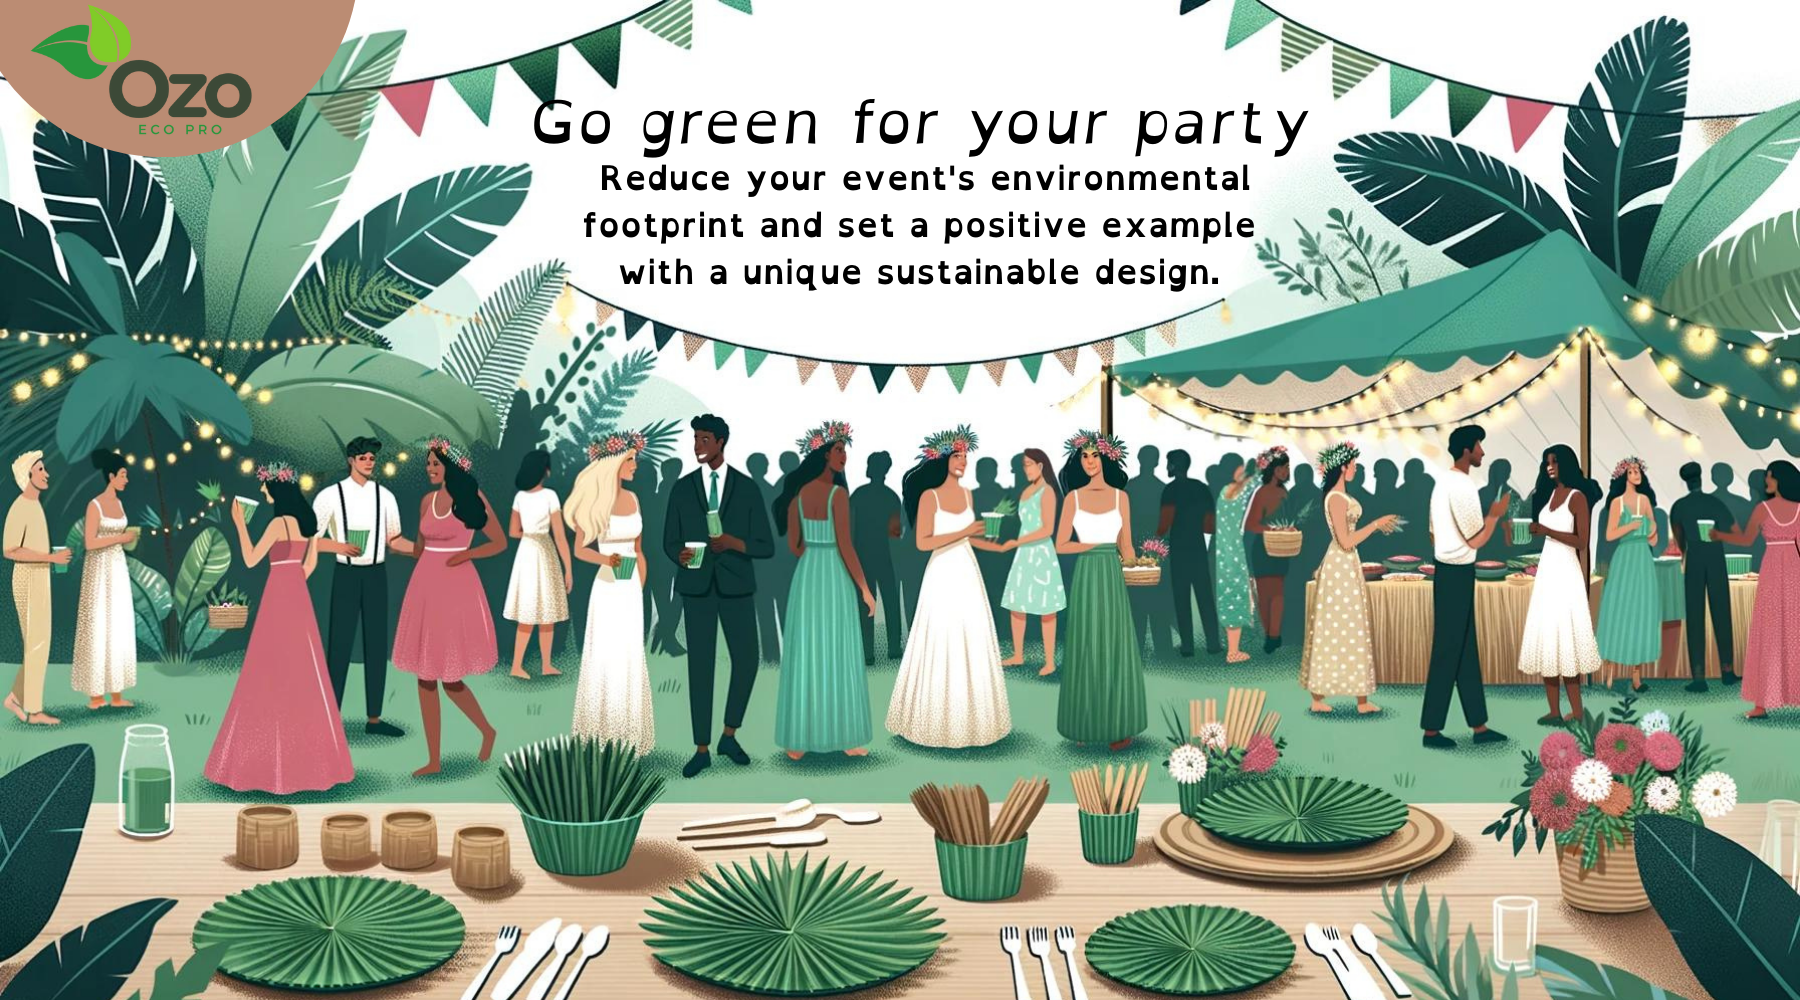 An illustrated eco-friendly event setting with guests enjoying a party surrounded by greenery. The scene showcases individuals in elegant attire, with some holding drinks, while others converse. Decorations include sustainable products such as bamboo cutlery, green glass bottles, and paper decorations. The background text promotes reducing an event's environmental footprint with sustainable design, and the logo 'Ozo Eco Pro' is displayed at the top left.